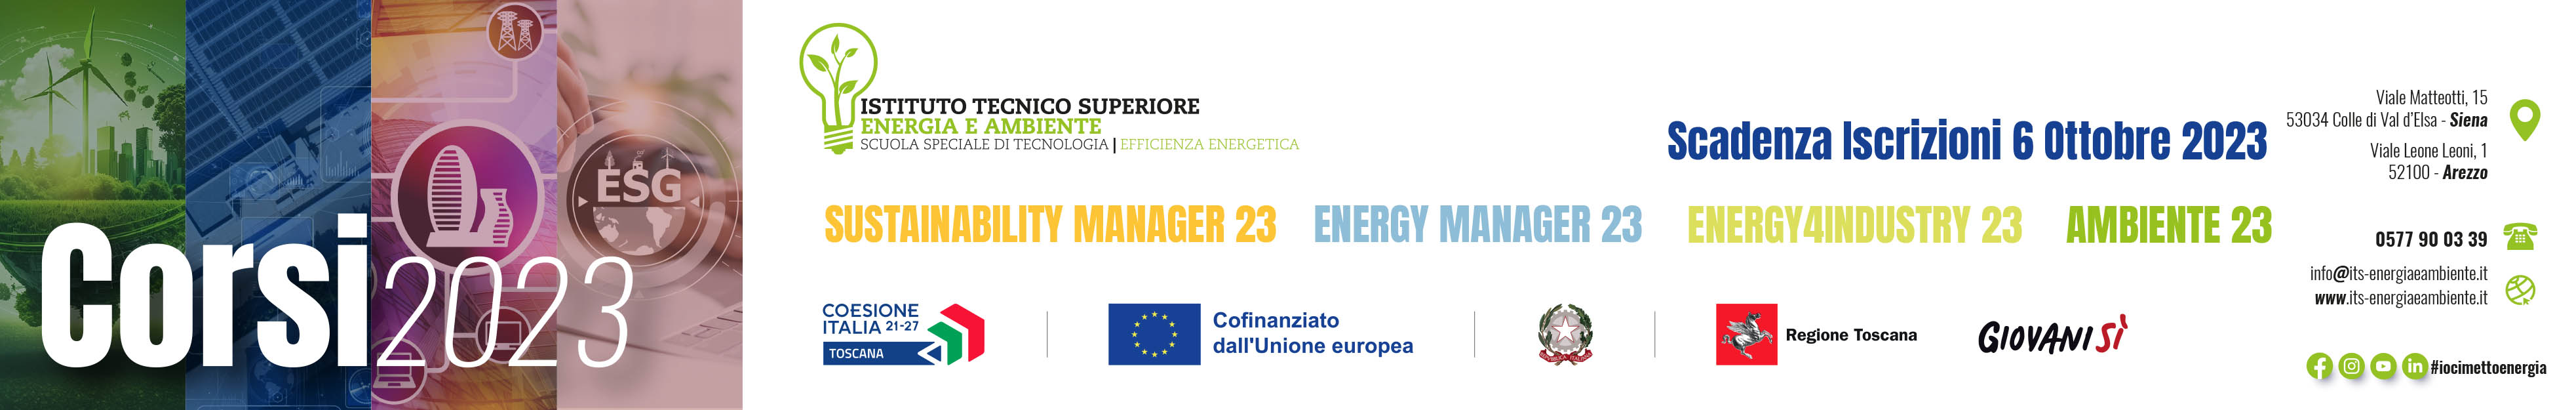 Banner Corsi ITS Energia e Ambient.jpg